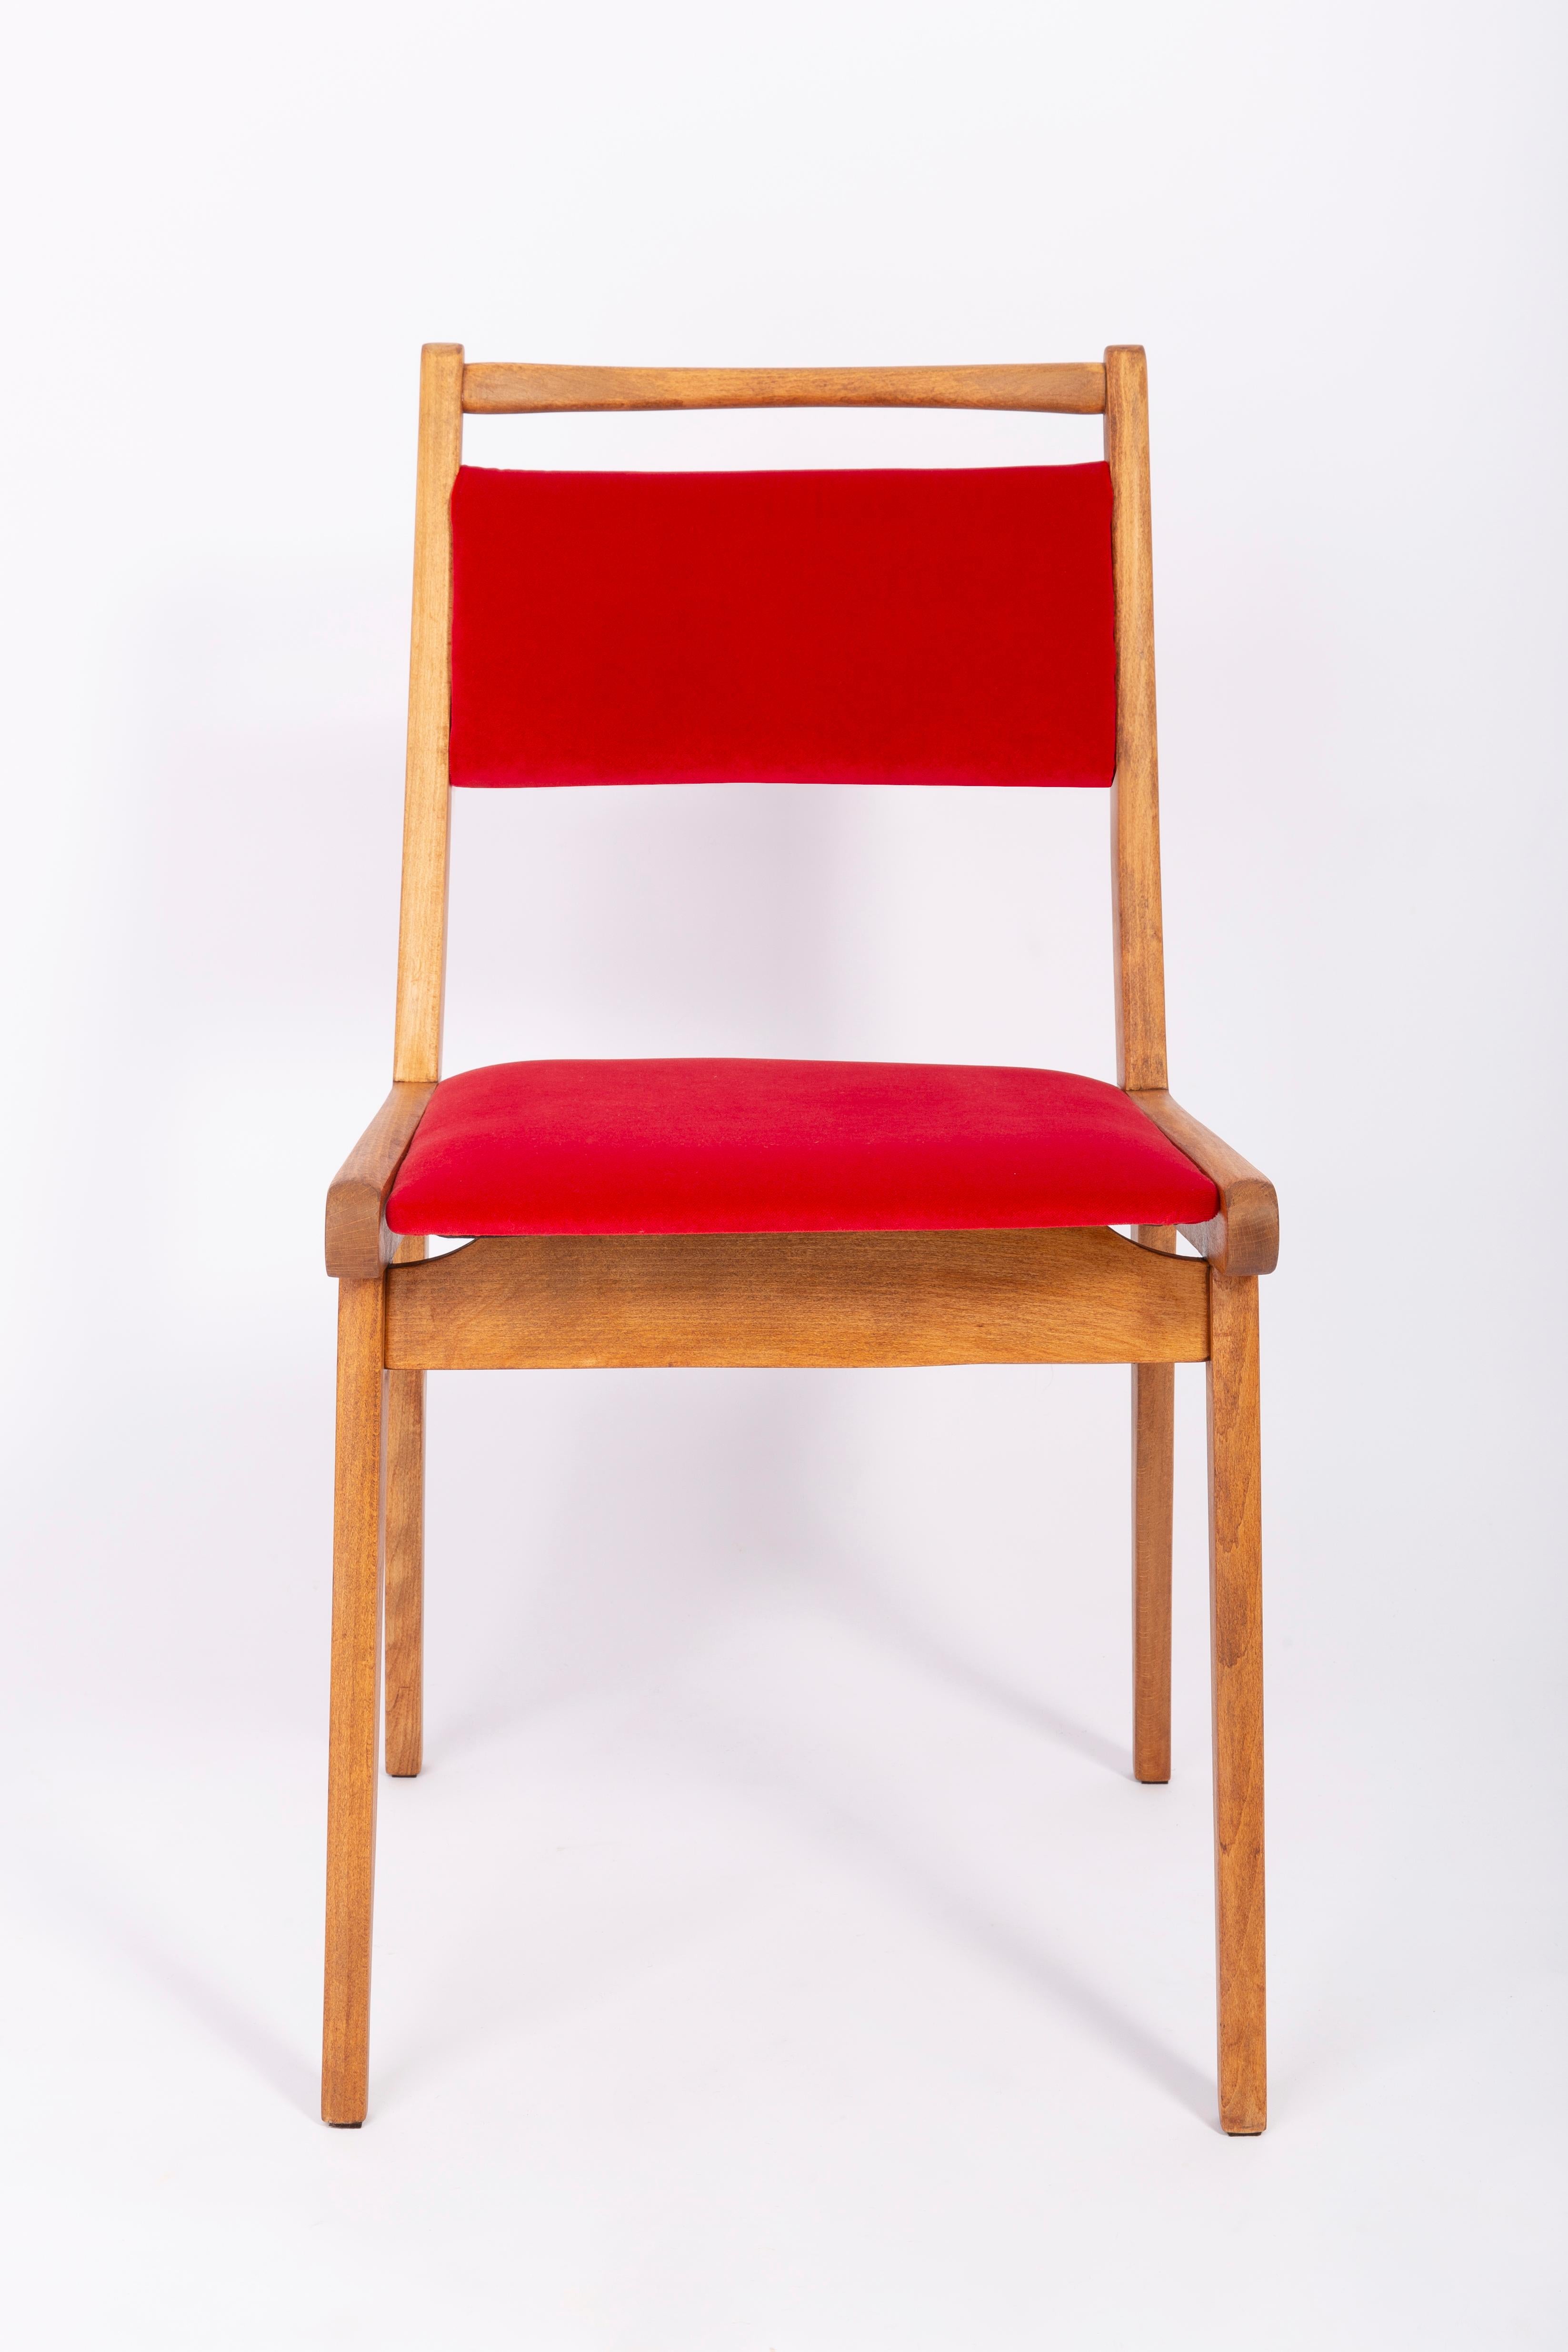 Set of Eight 20th Century Red Velvet Chairs, by Rajmund Halas, Poland, 1960s For Sale 1